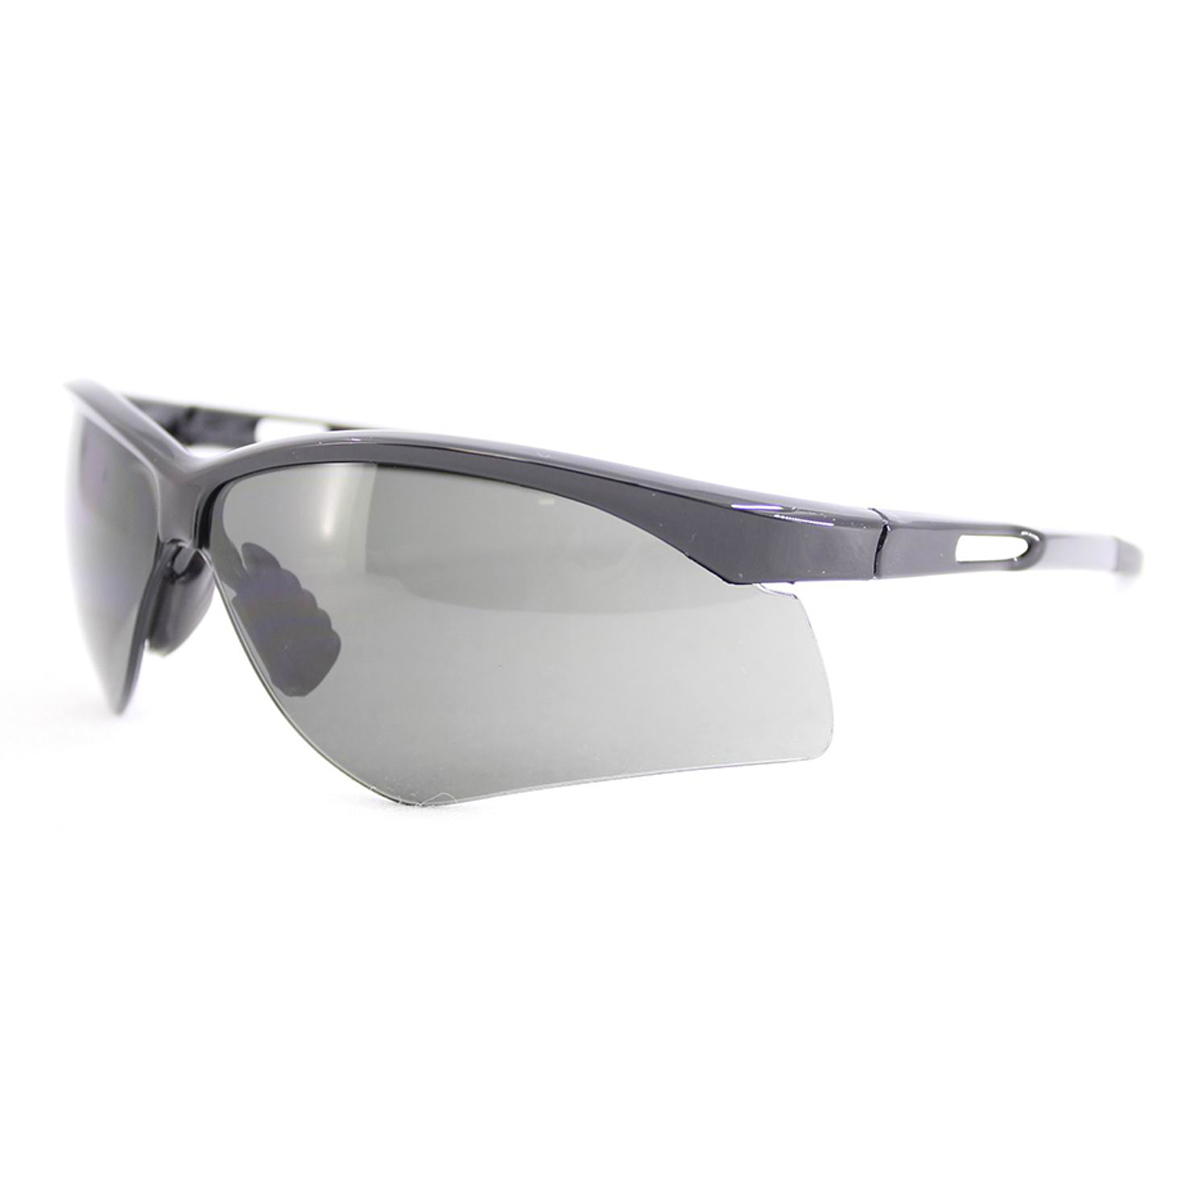 RADNOR® Premier Series Black Safety Glasses With Gray Polycarbonate Anti-Fog/Anti-Scratch Lens (Availability restrictions apply.